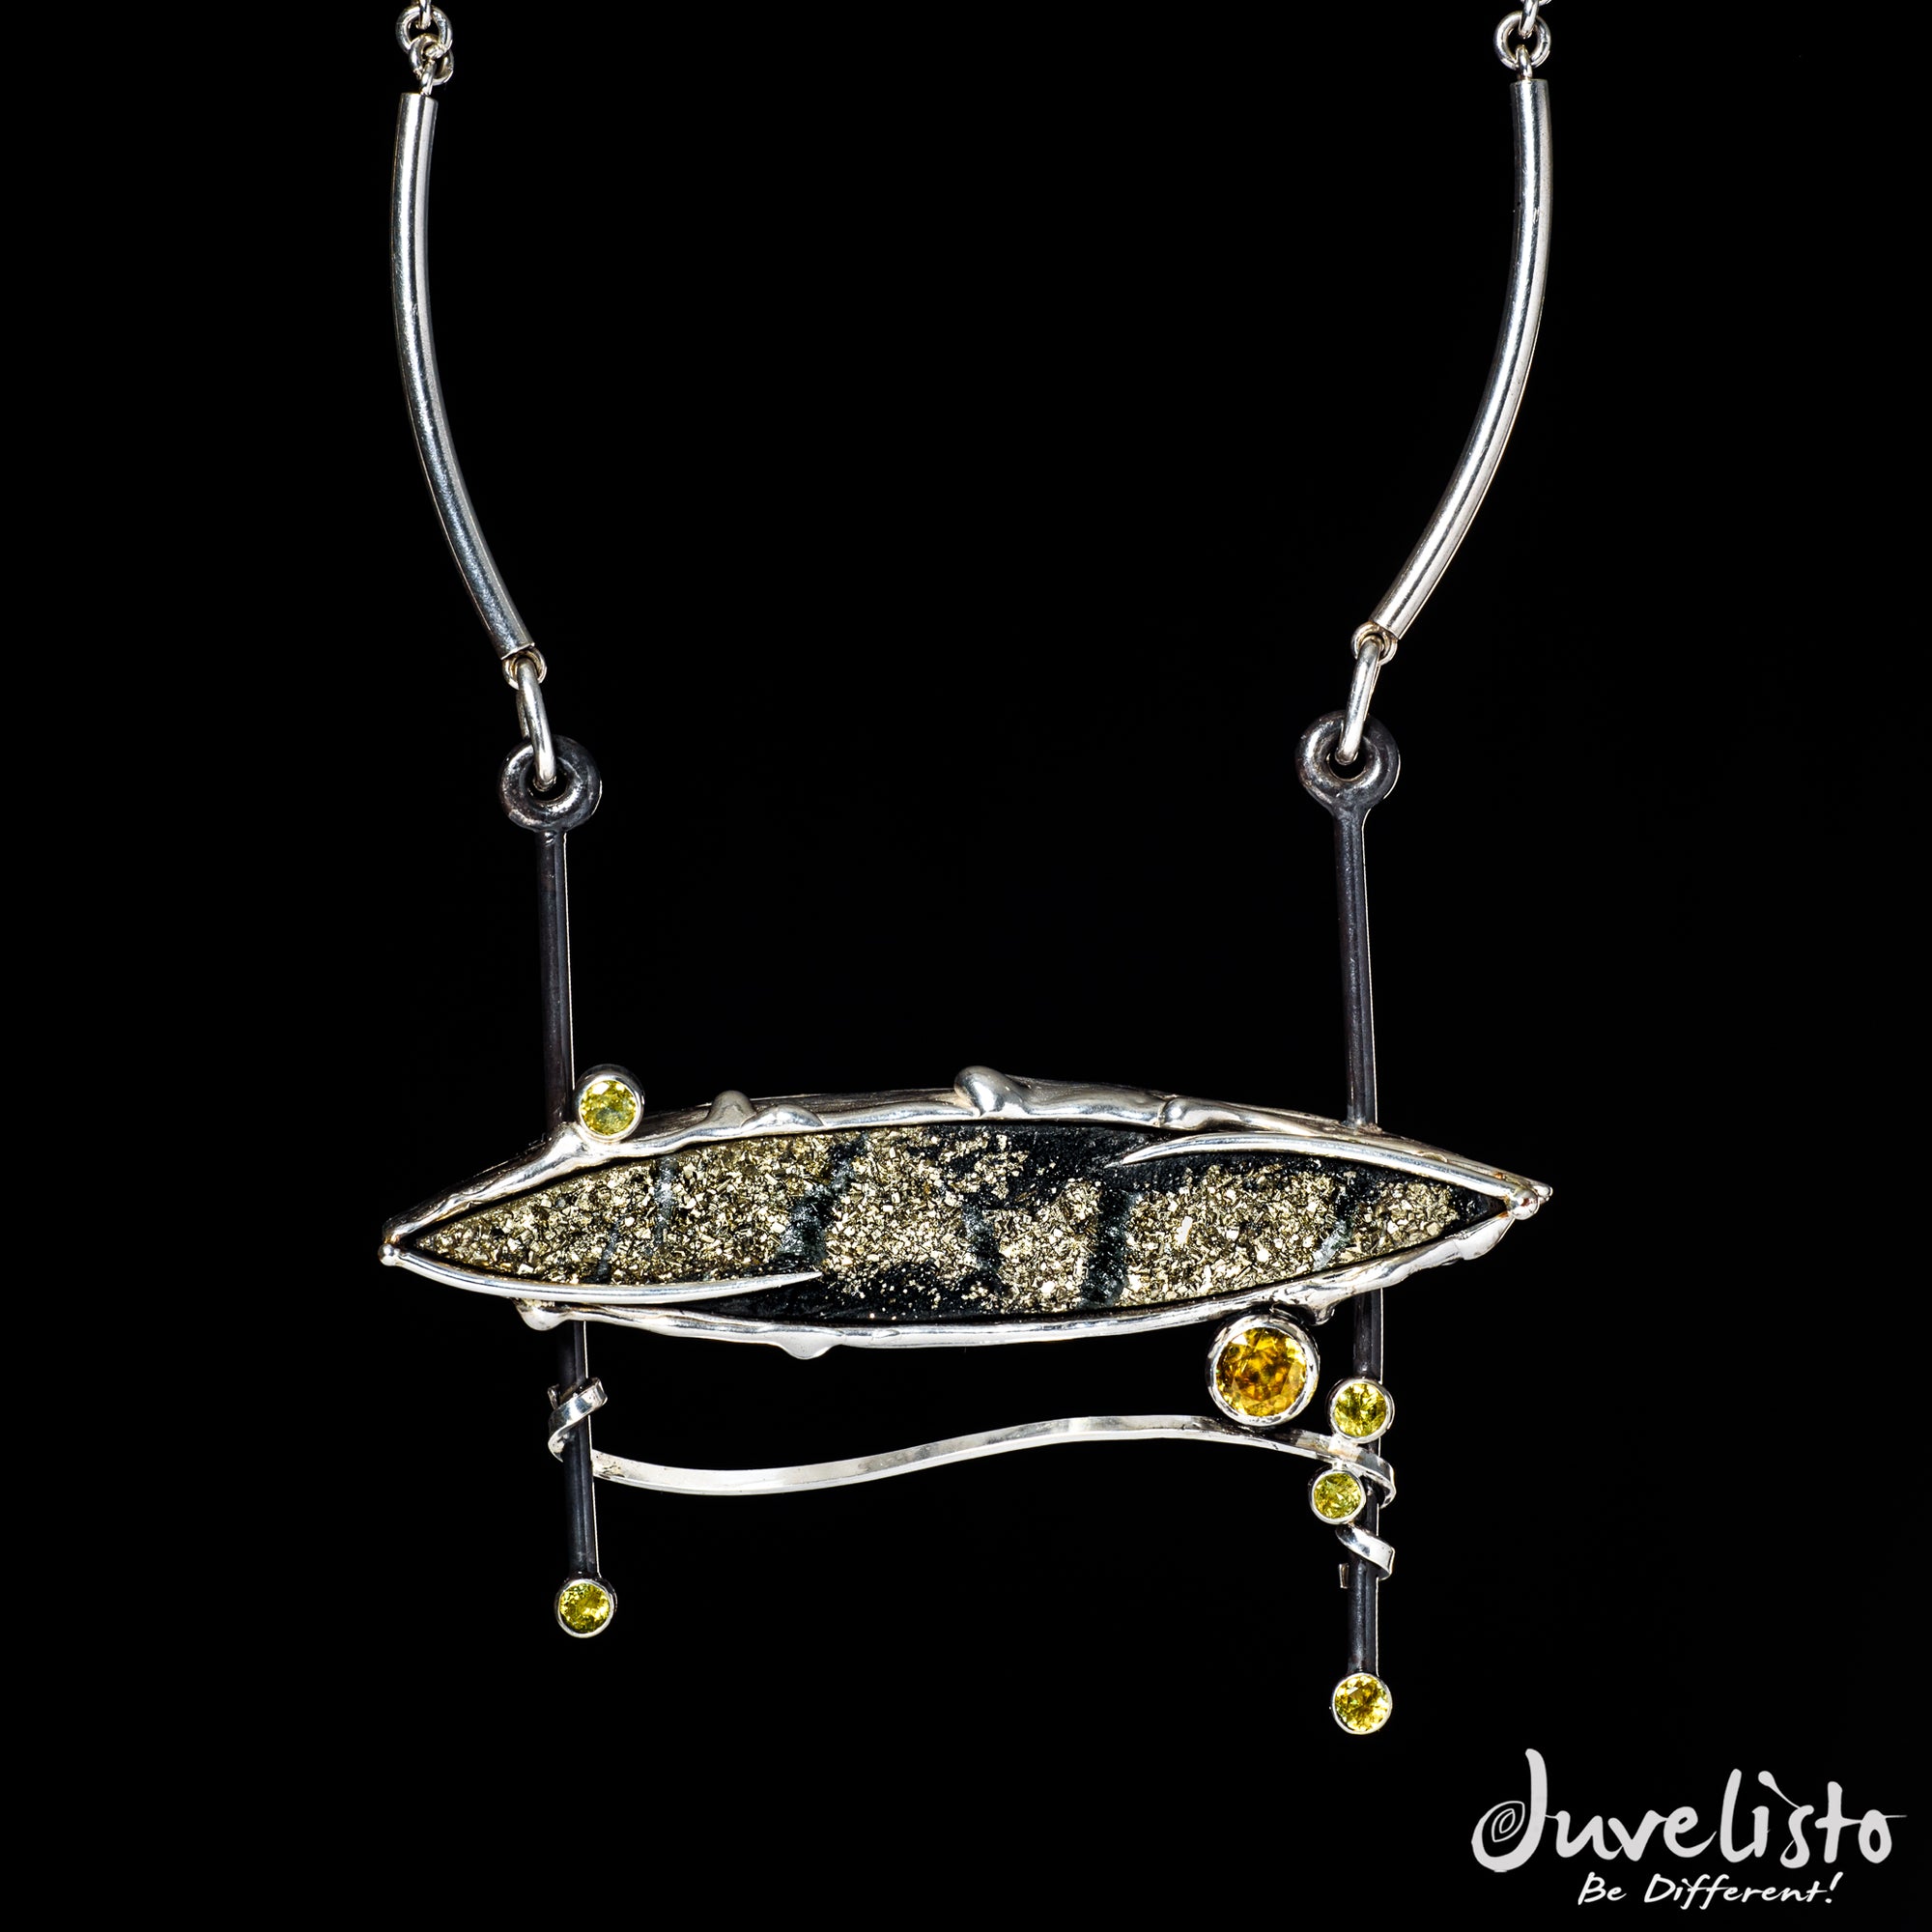 Juvelisto Design  Oversize Marquee Slate with Pyrite and Sphene Breastplate, Necklace